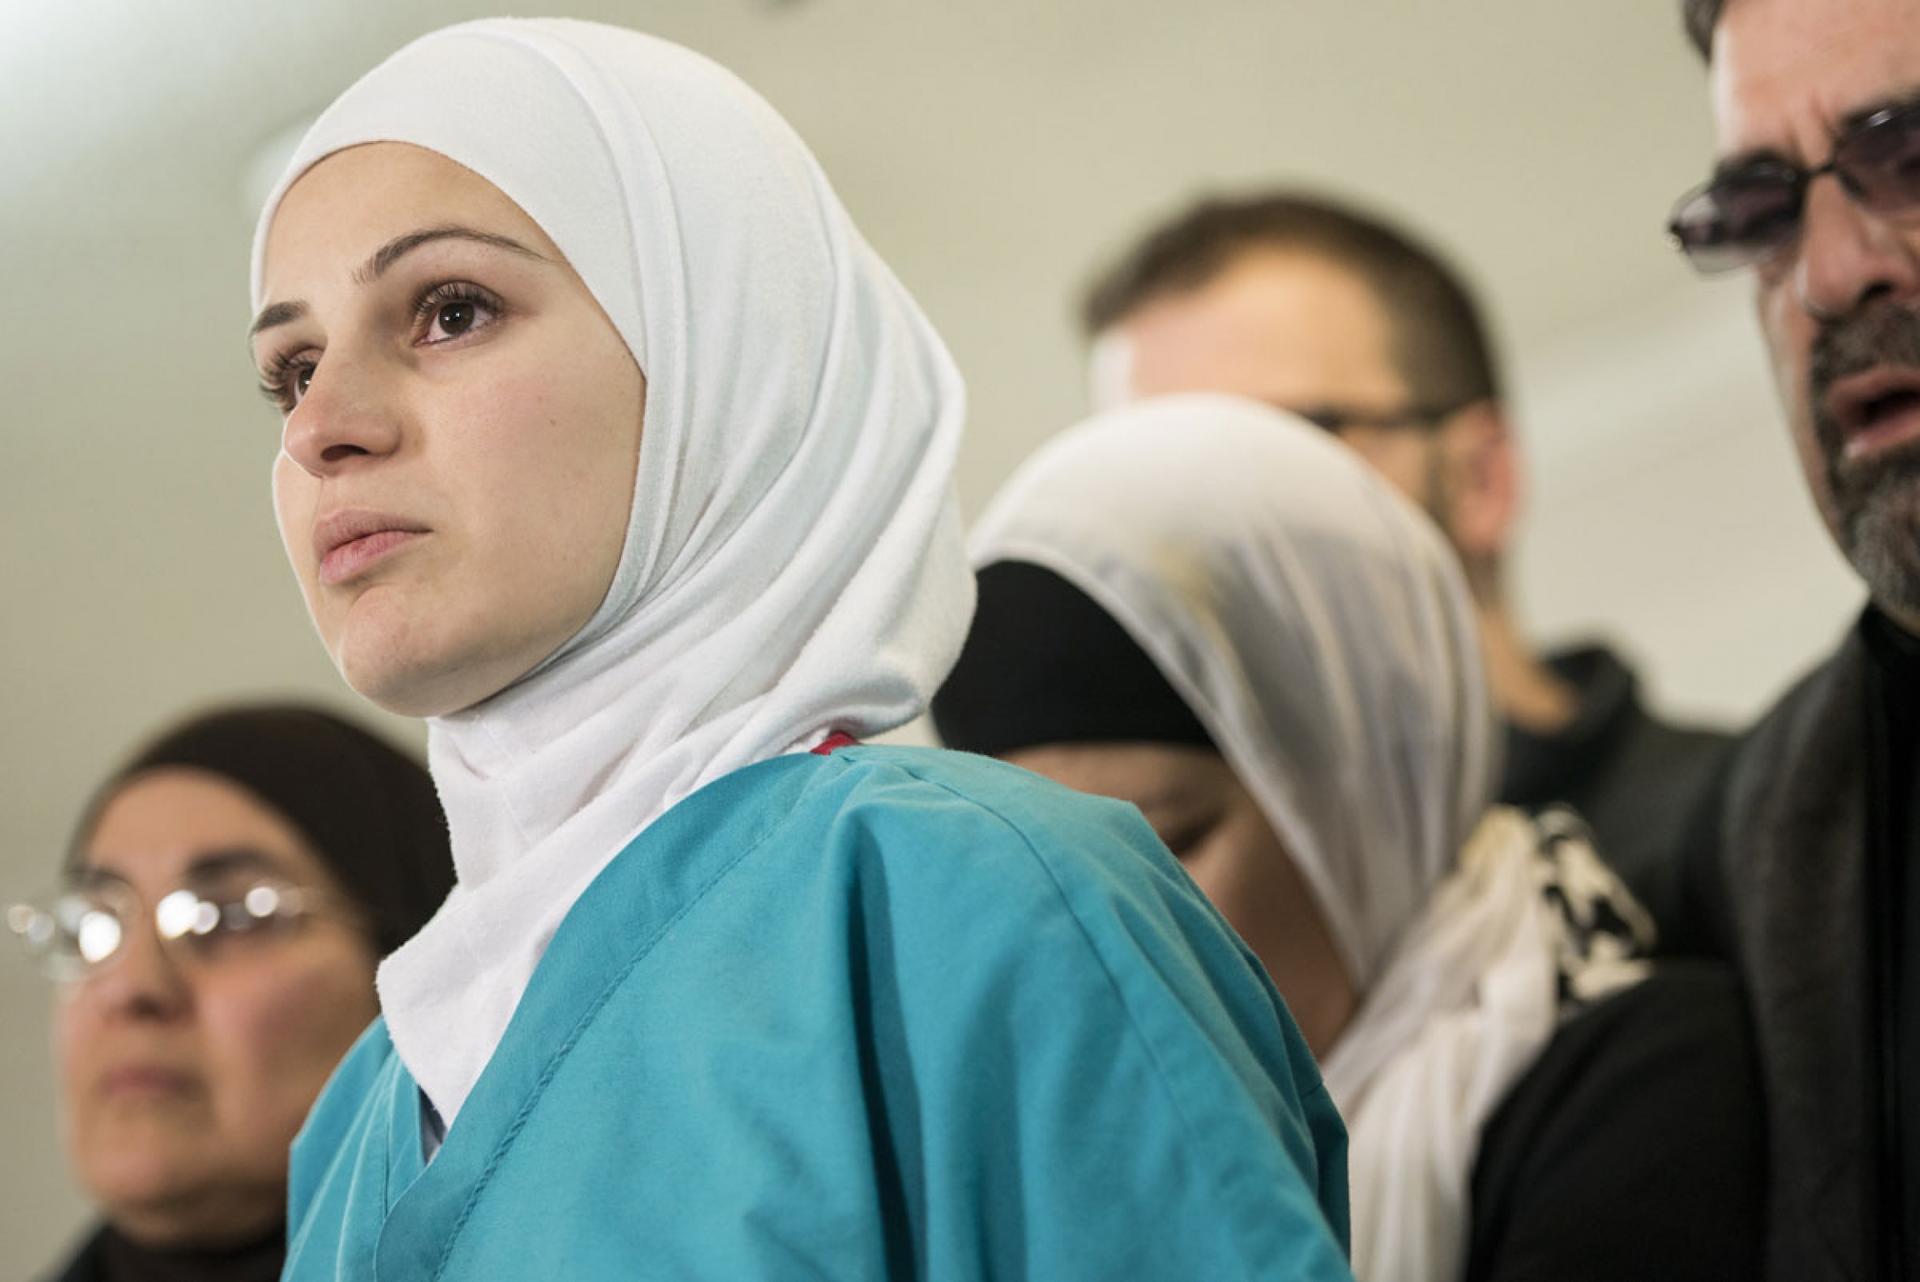 Surrounded by loved ones, Dr. Suzanne Barakat speaks about her slain brother, Deah Barakat, during a press conference in February 2015 in Raleigh, N.C. Deah Barakat, his wife and her sister were killed by a neighbor. The Barakat family called it an Islamo